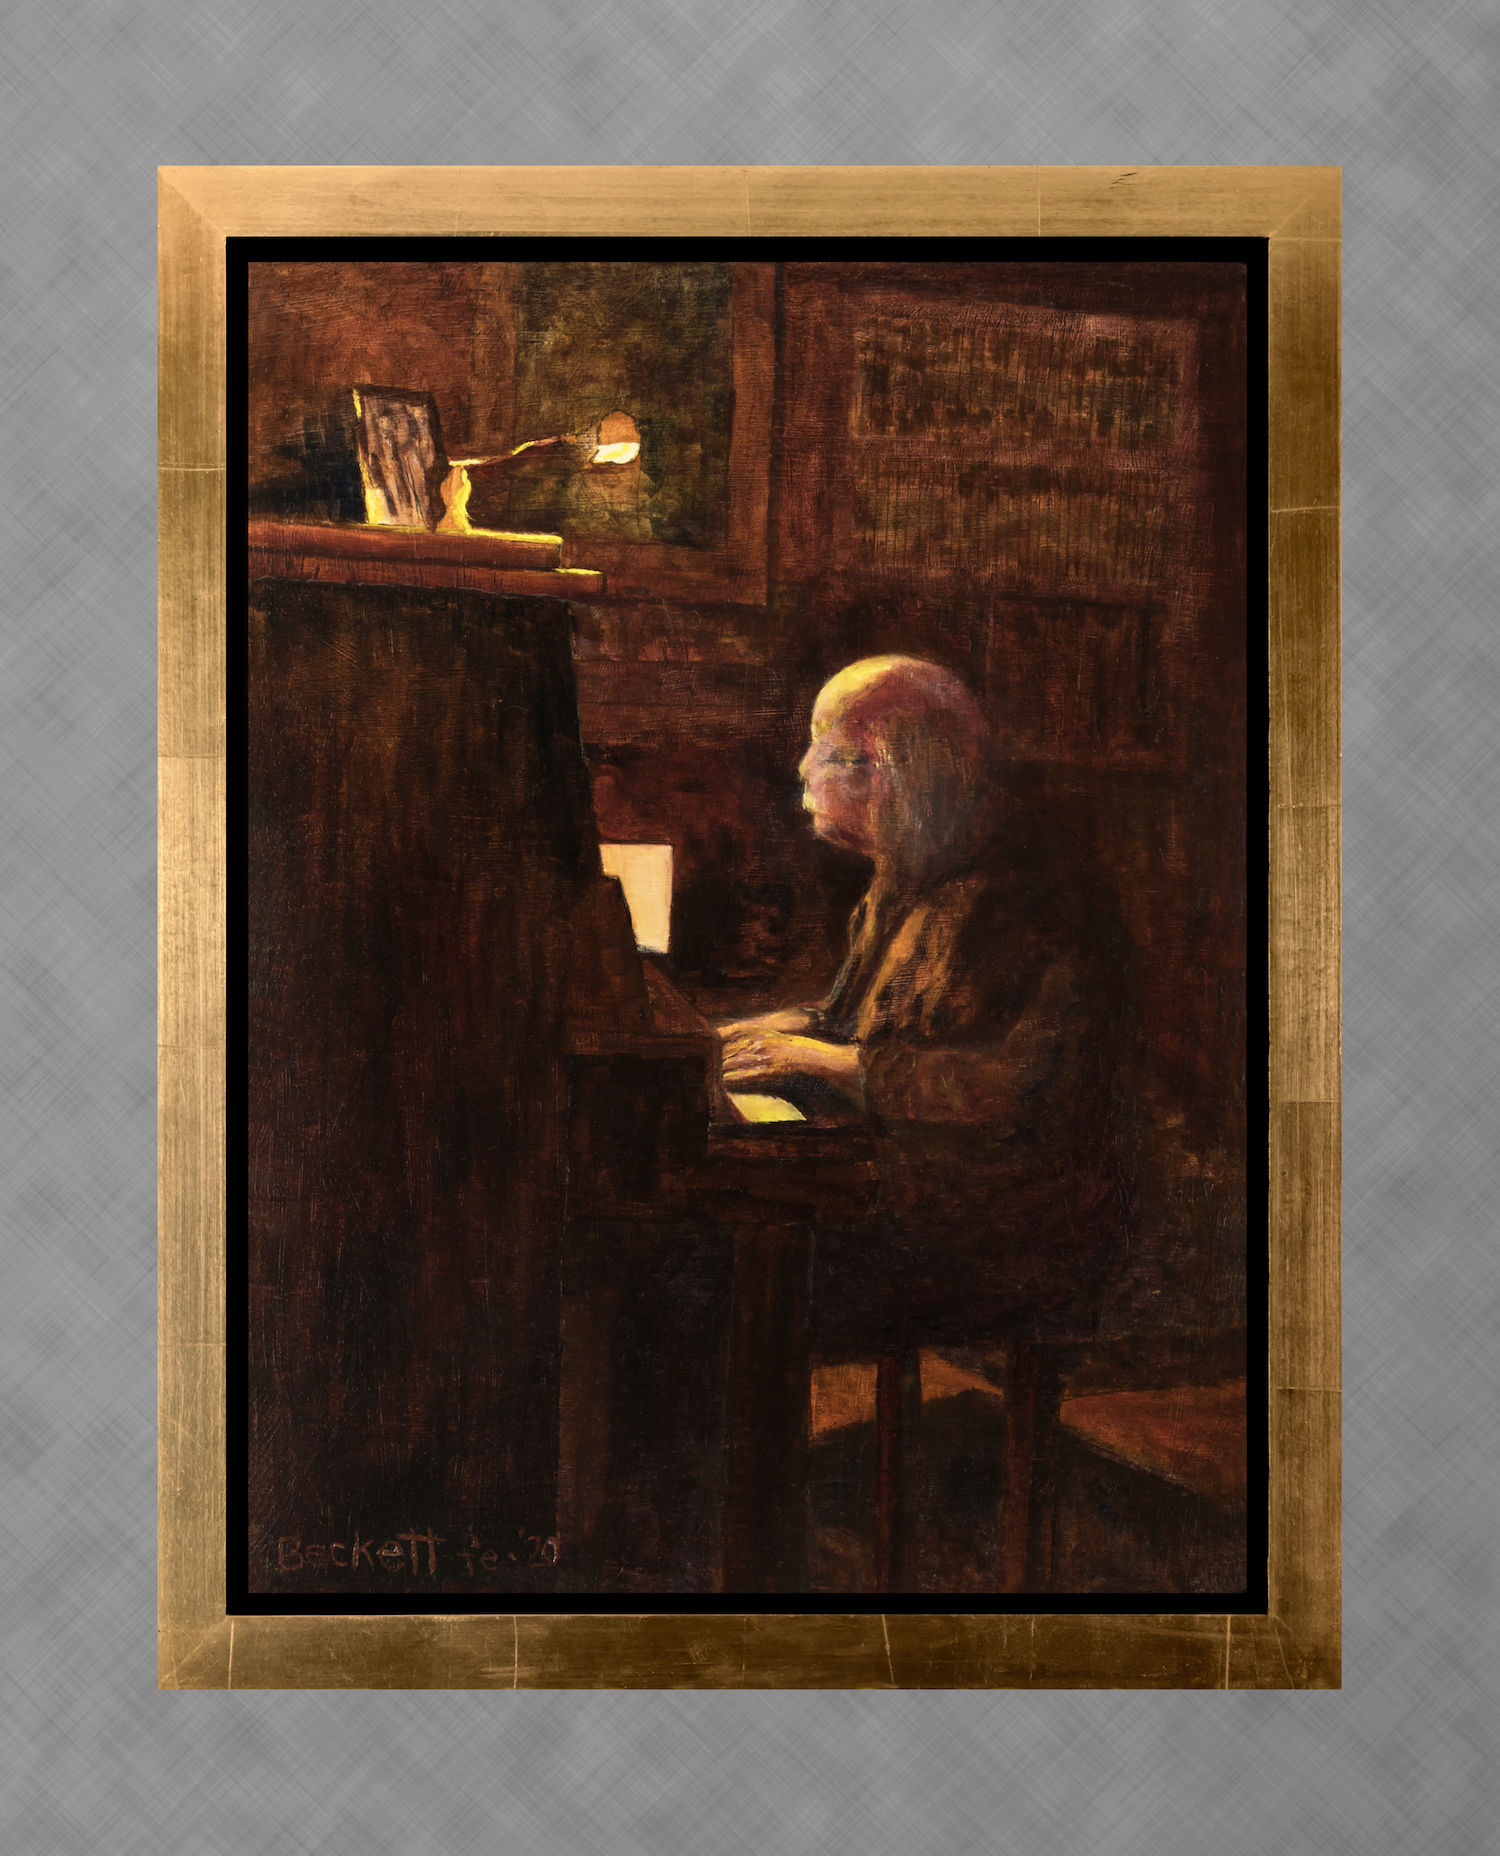 Larry Beckett at the Piano - 18 in x 24 in - Oil on Canvas 2020